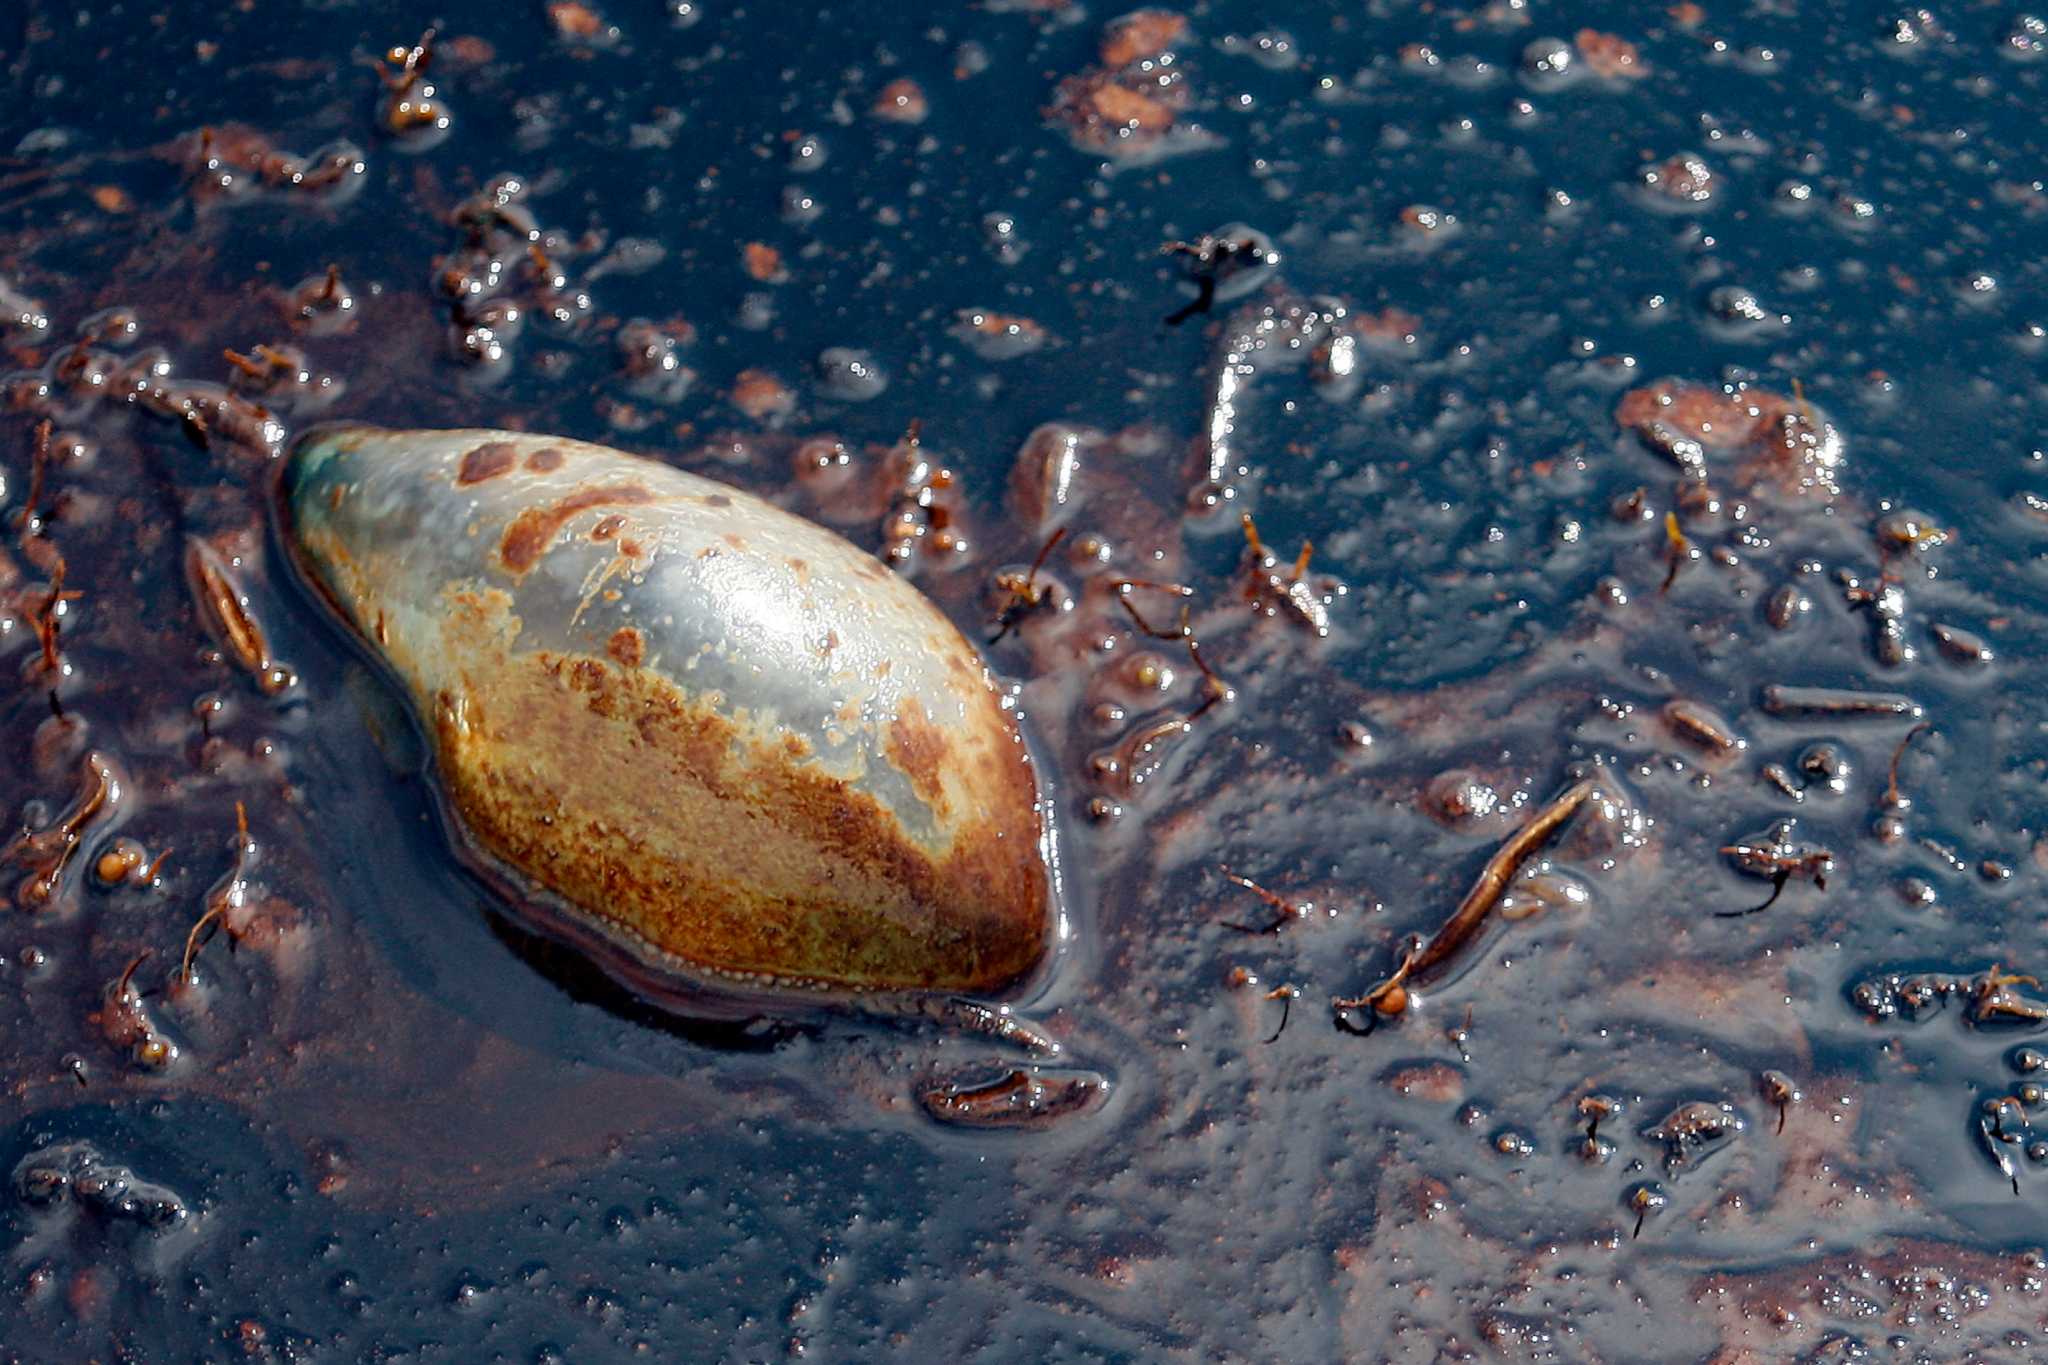 U.S. formally asks judge to approve BP spill settlement.